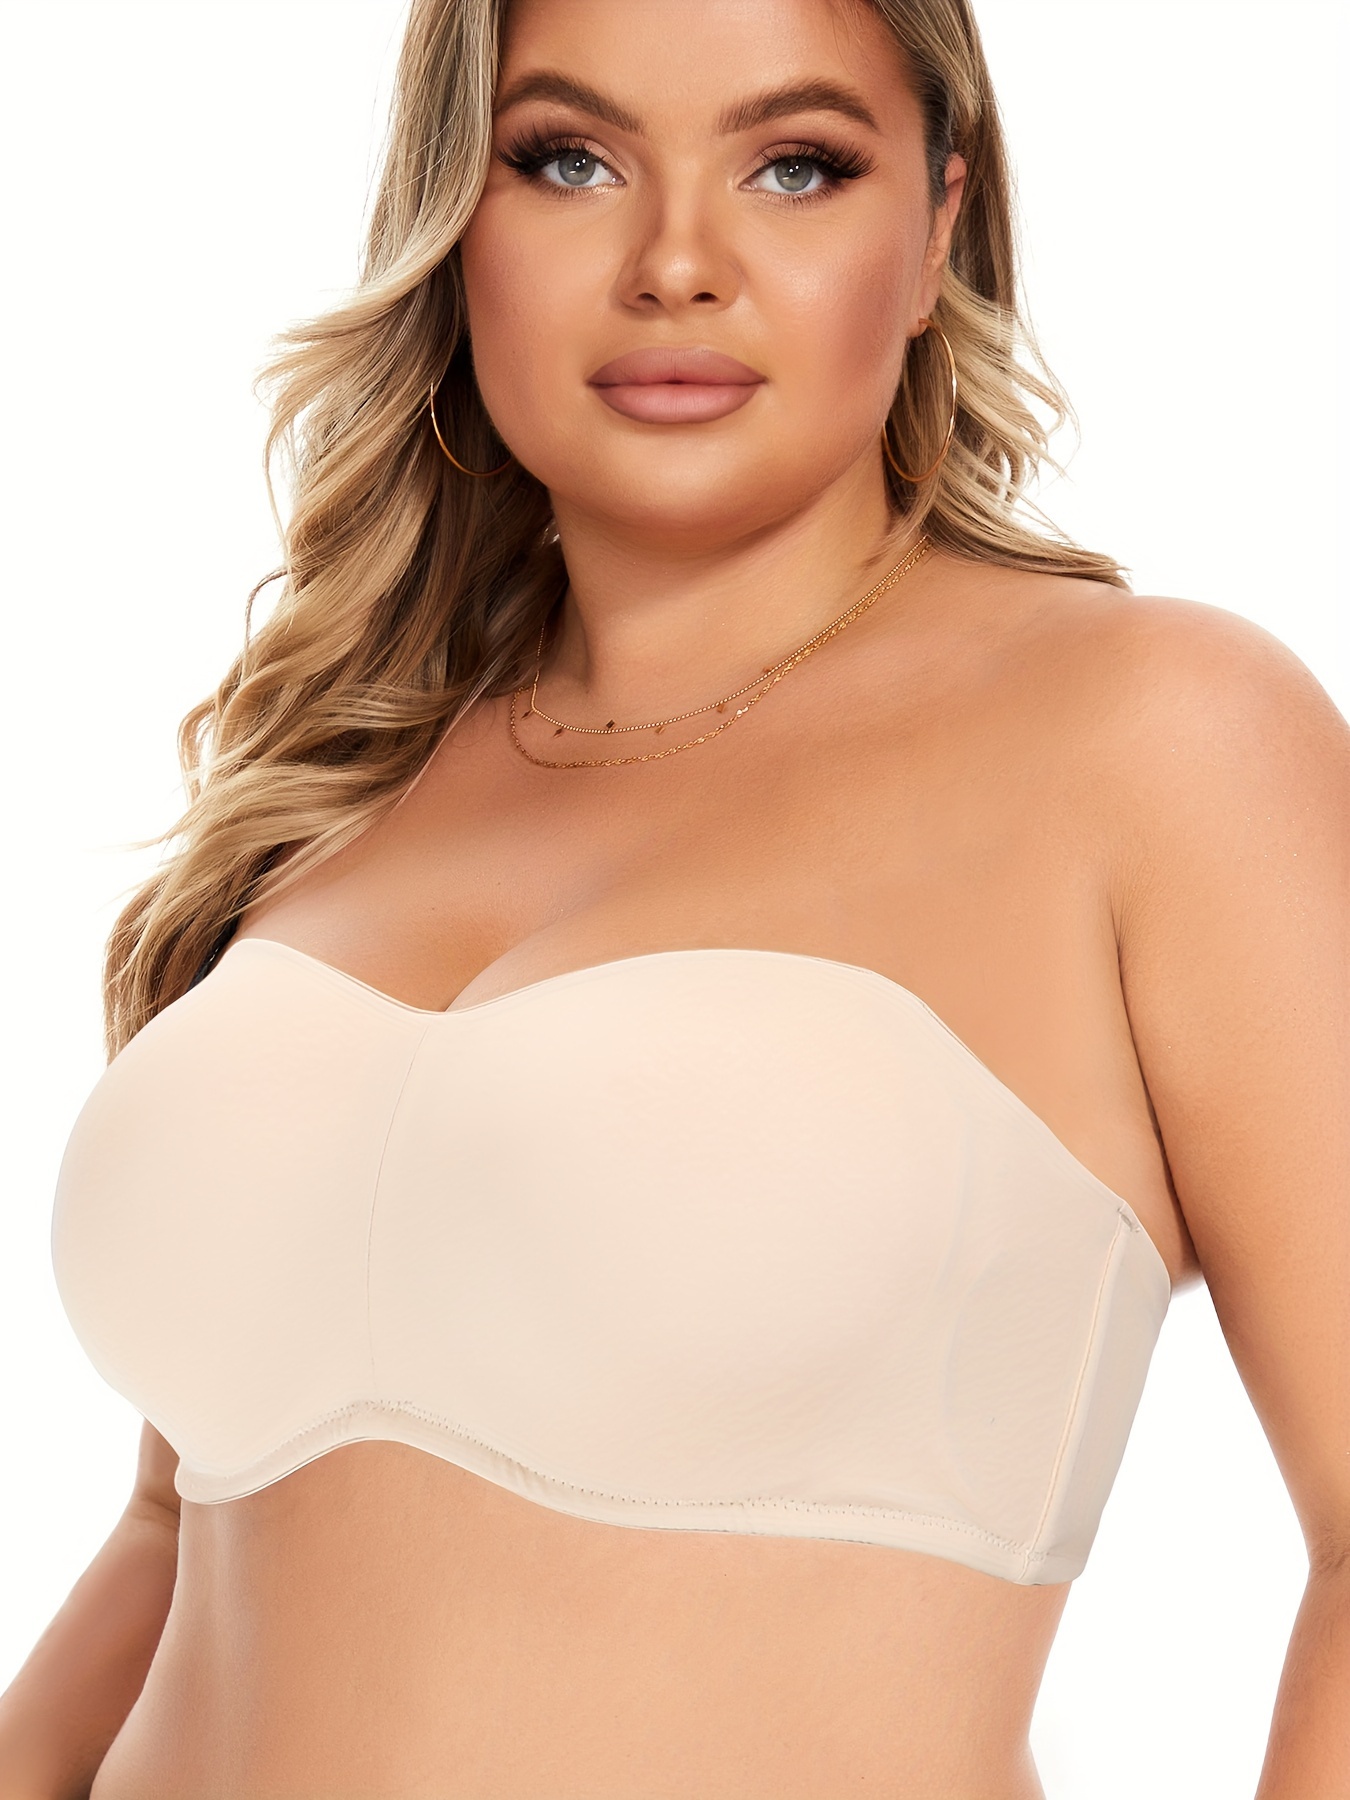 Women's Tube Top Sport Bras Plus Size Strapless Removable Padded